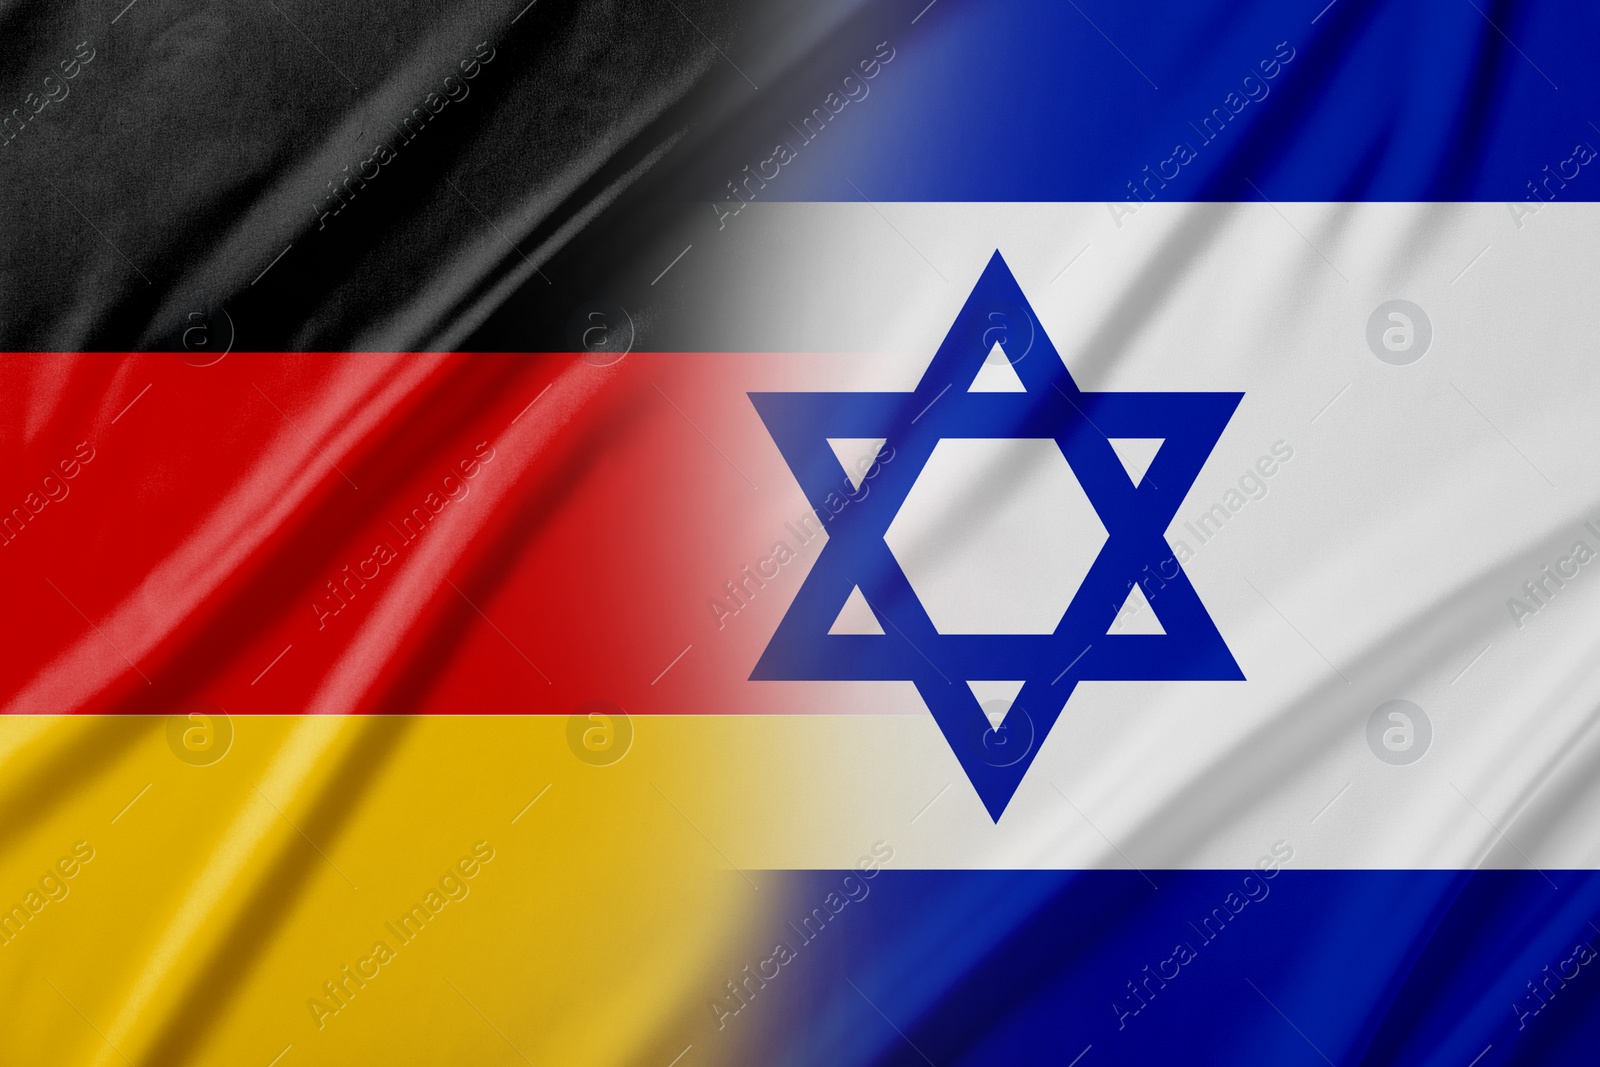 Image of International relations. National flags of Germany and Israel